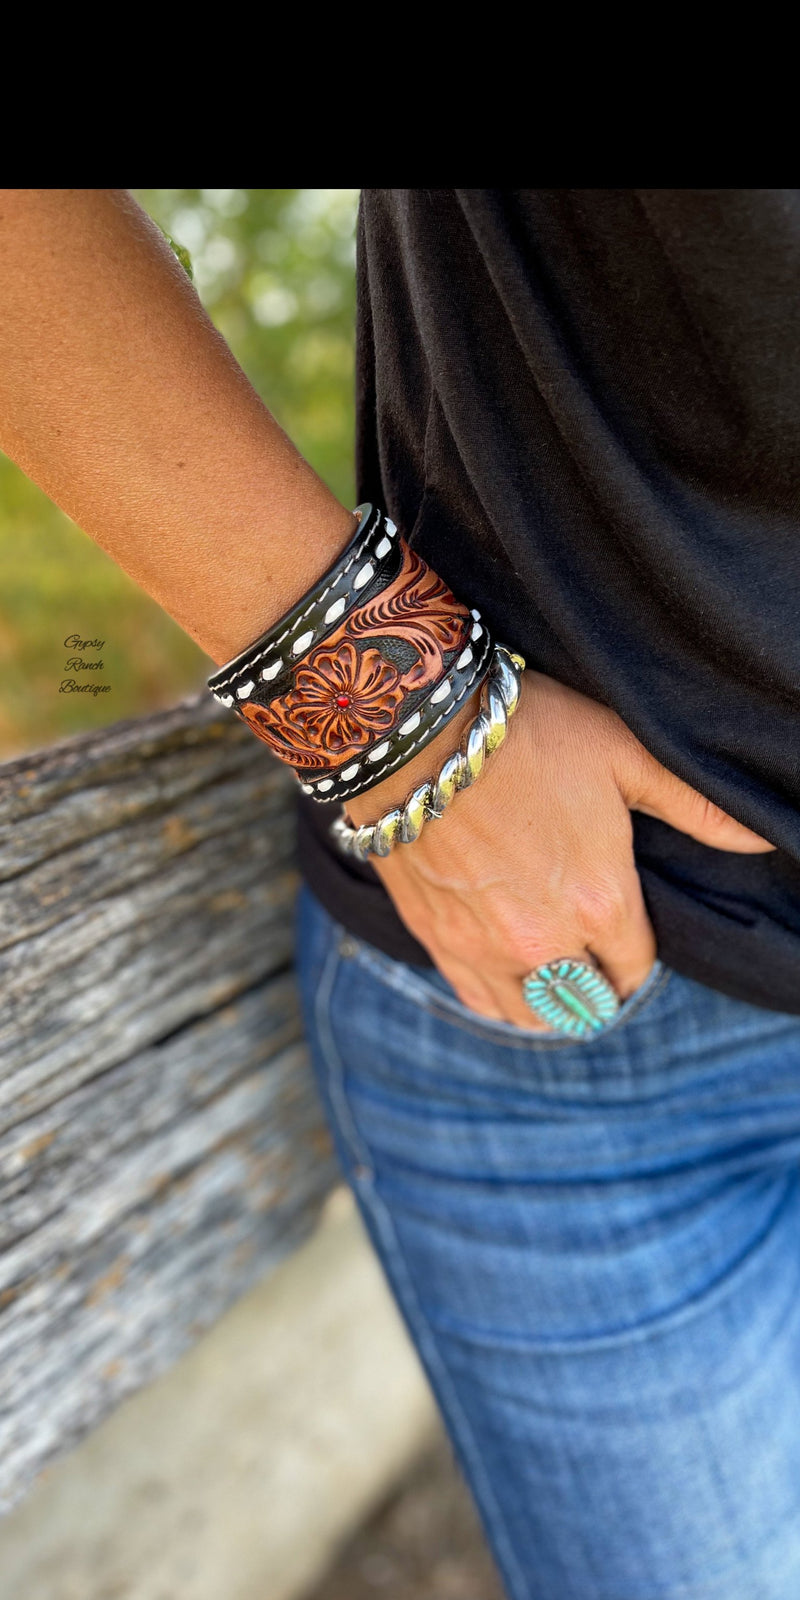 Ranch Rodeo Tooled Leather Cuff Bracelet